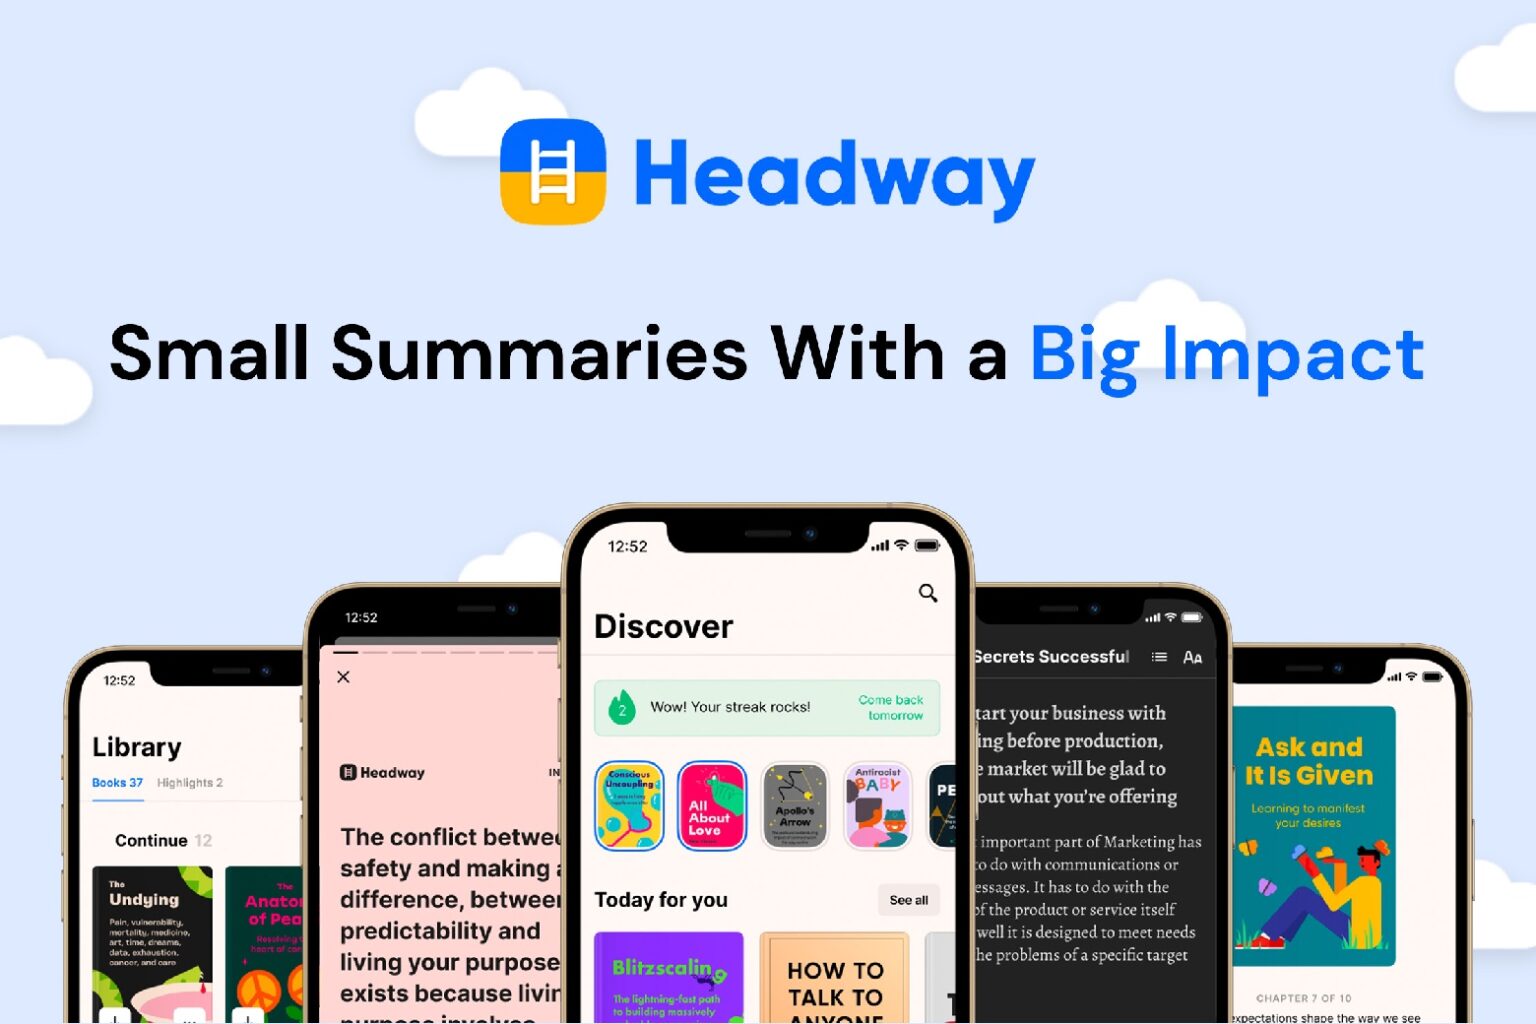 Spend your next flight learning with Headway's inspiring book summaries, now only $59.97.